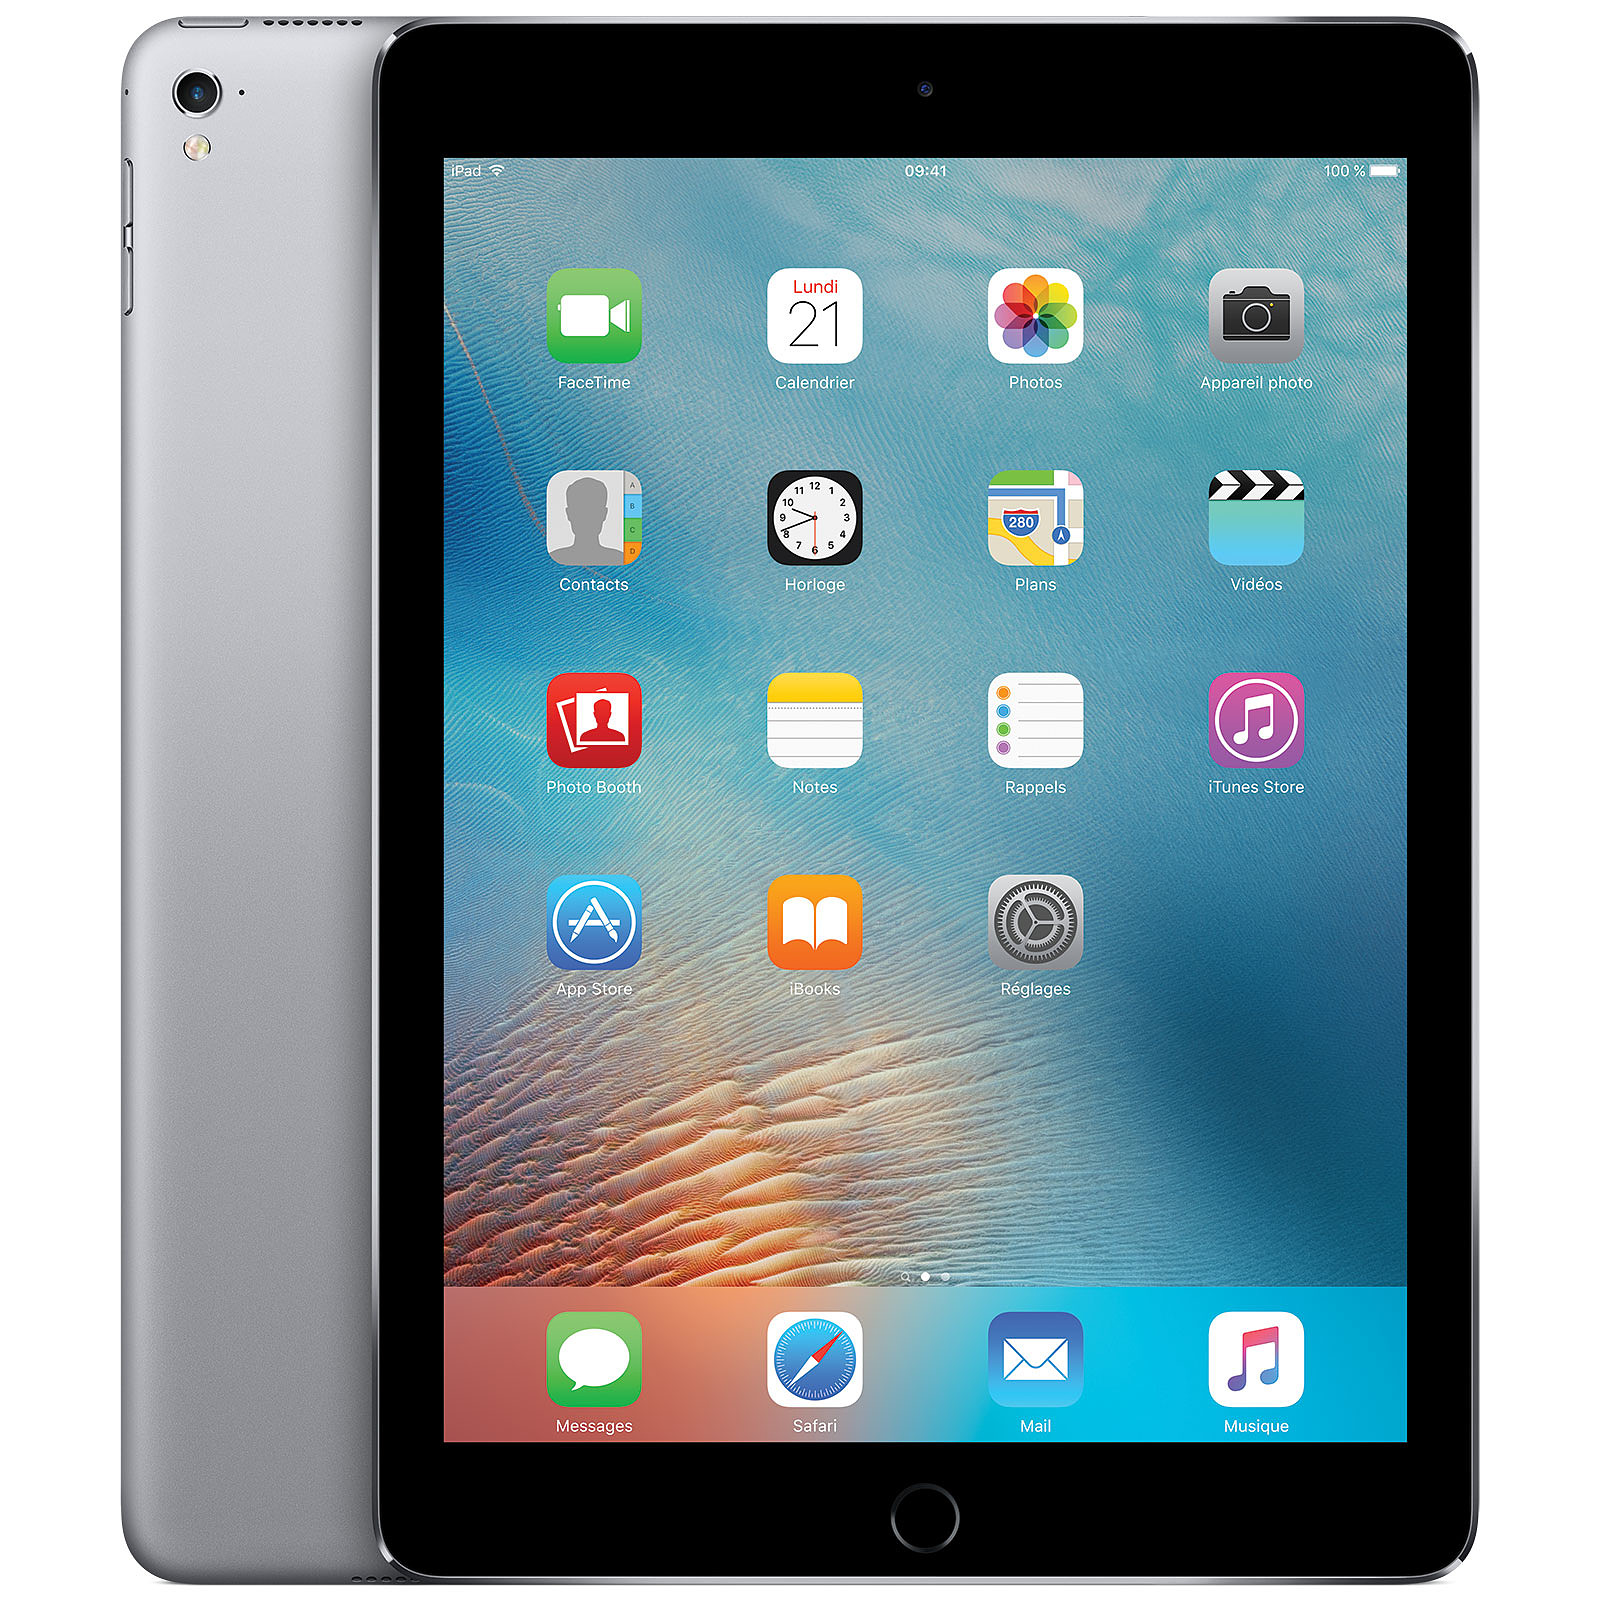 Apple iPad Pro 9.7" Wi-Fi 256 Go Gris Sideral · Reconditionne - Tablette tactile Apple